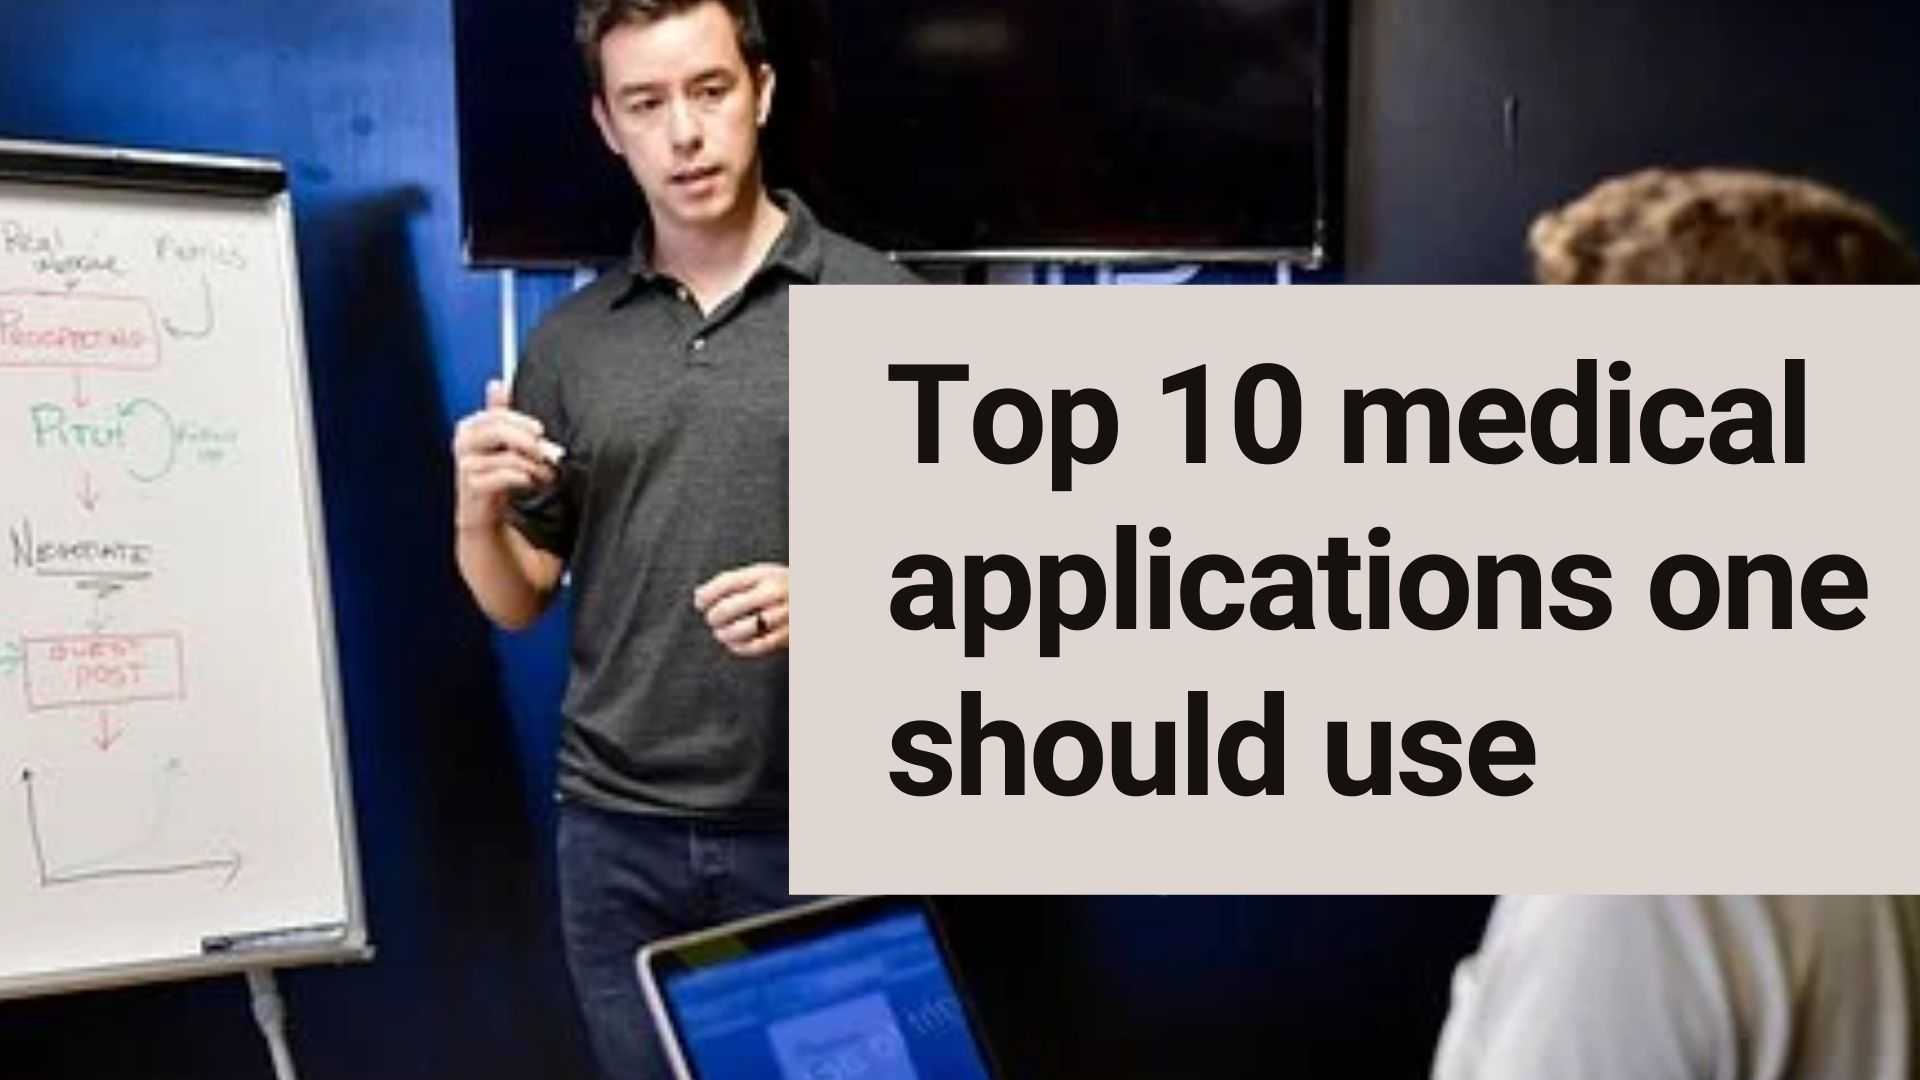 Top 10 medical applications one should use